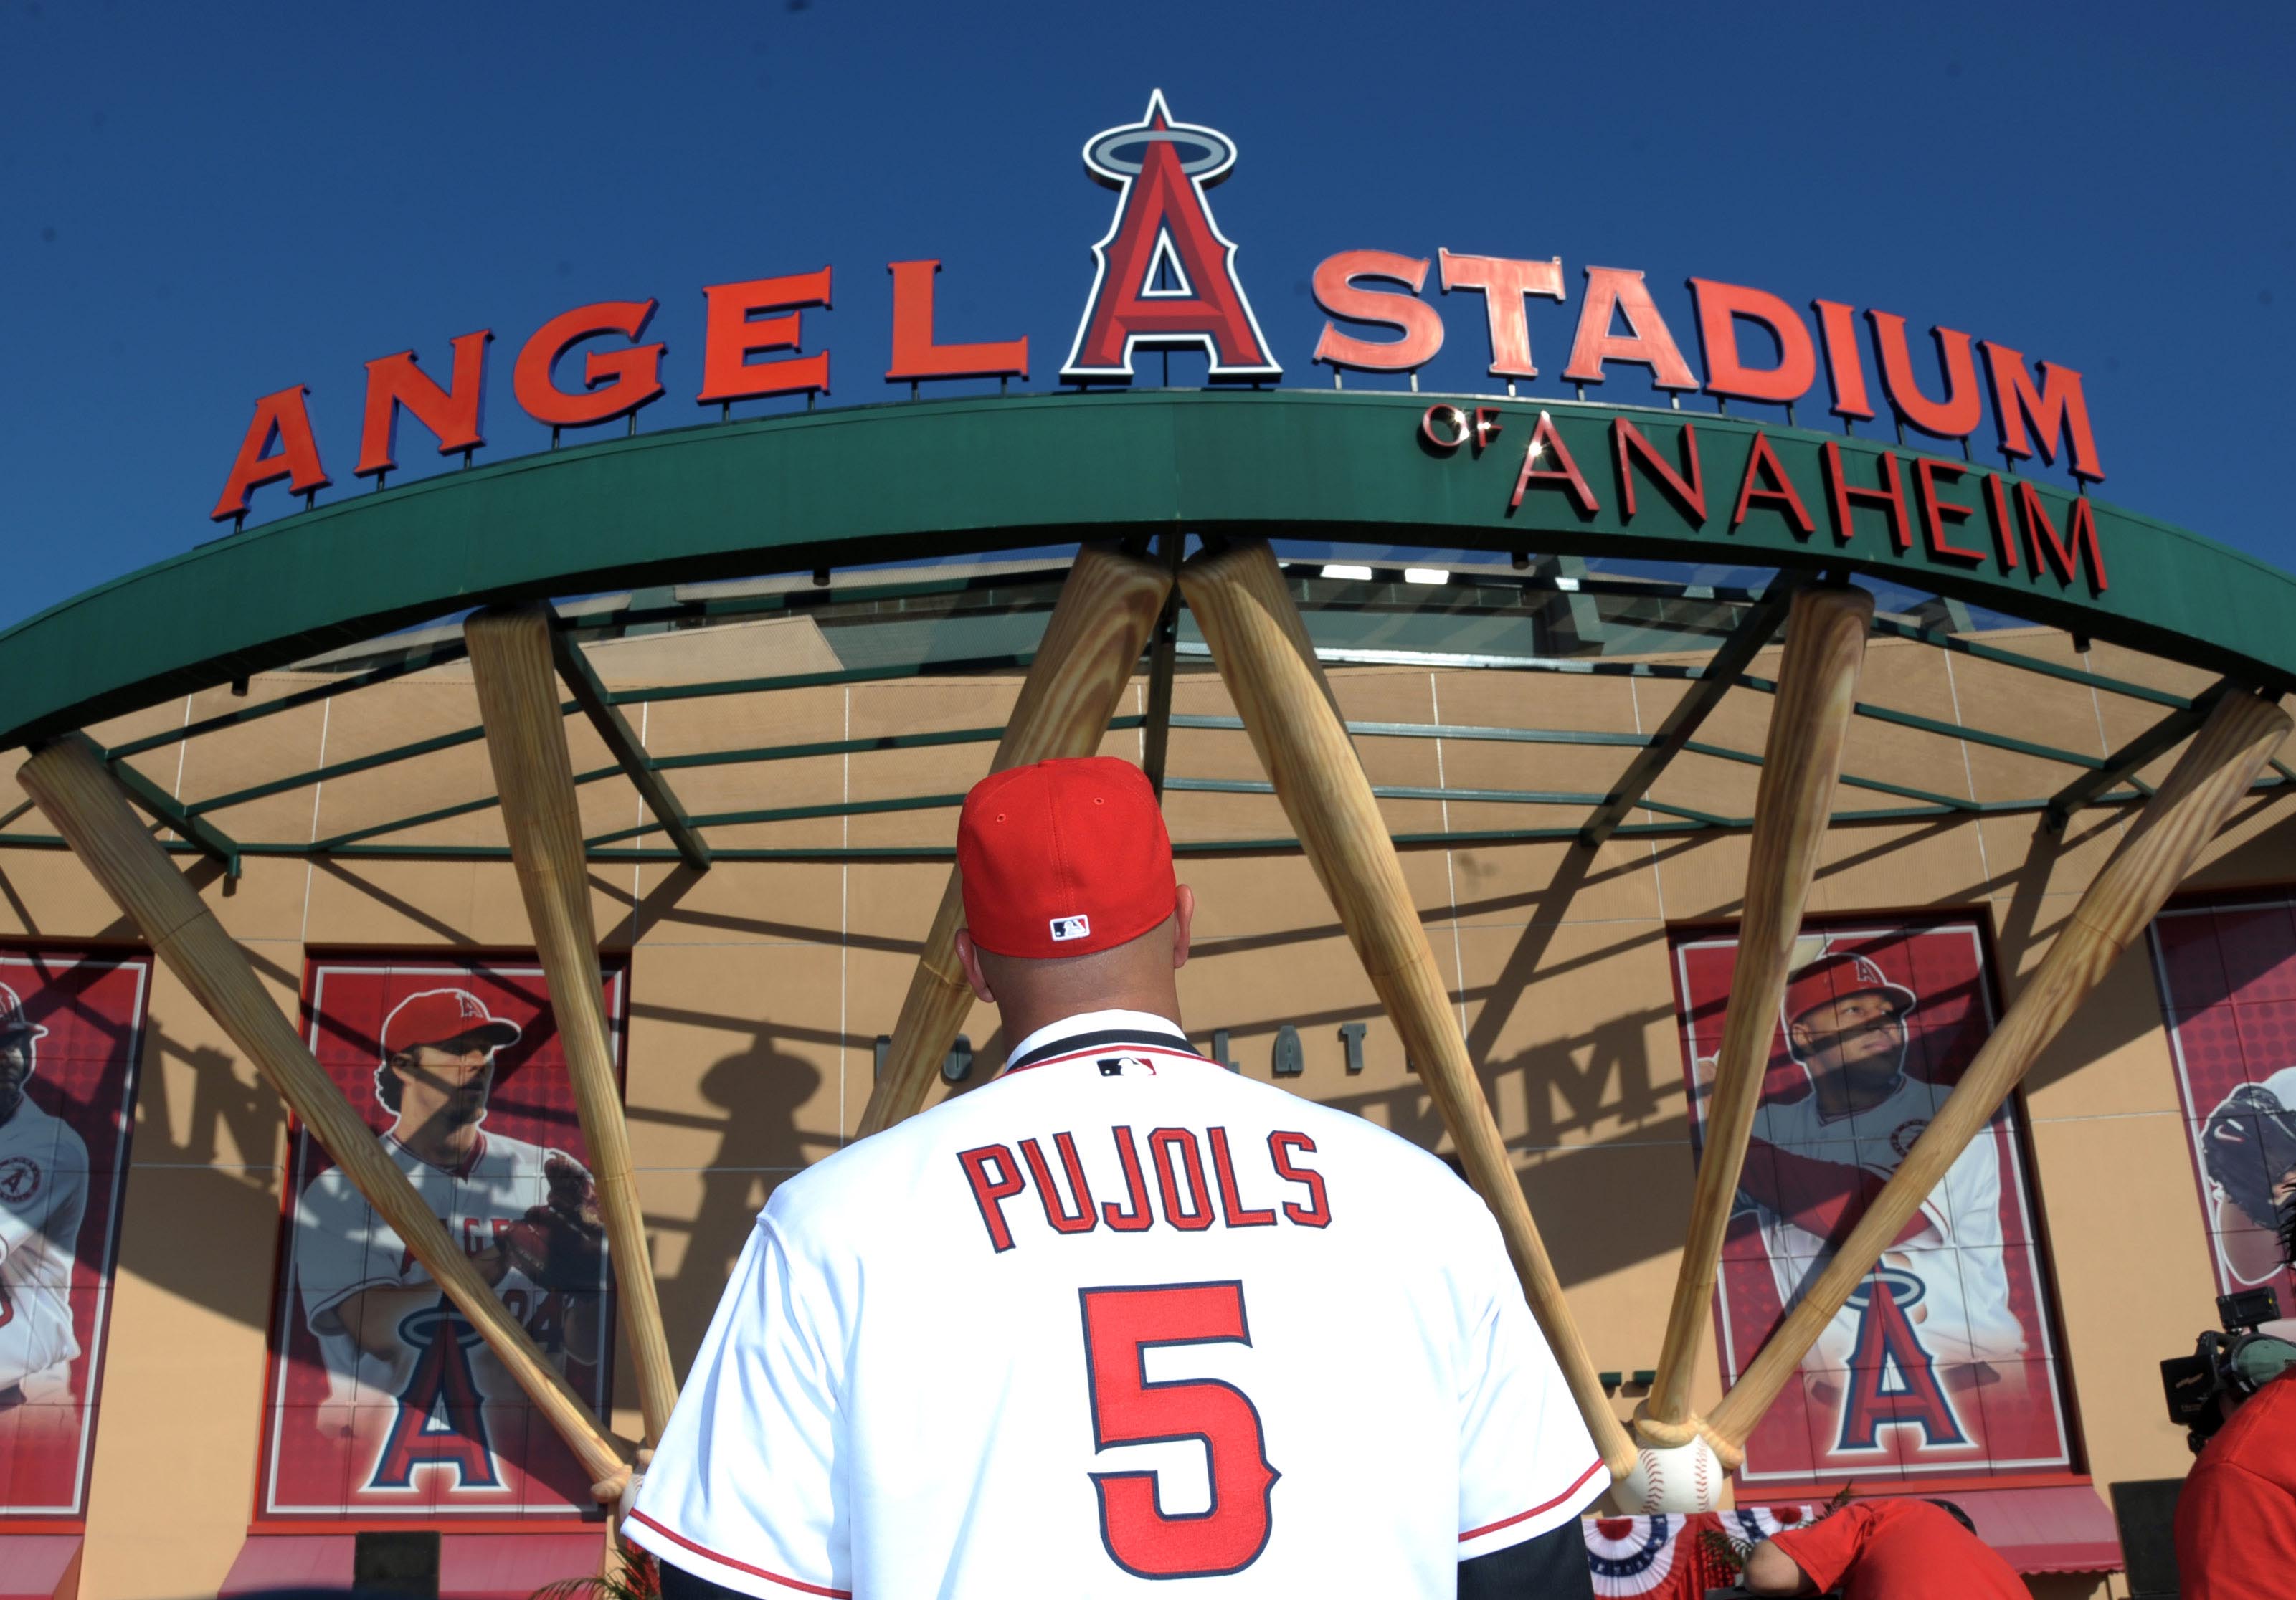 What works for Albert Pujols in Los Angeles that didn't in Anaheim